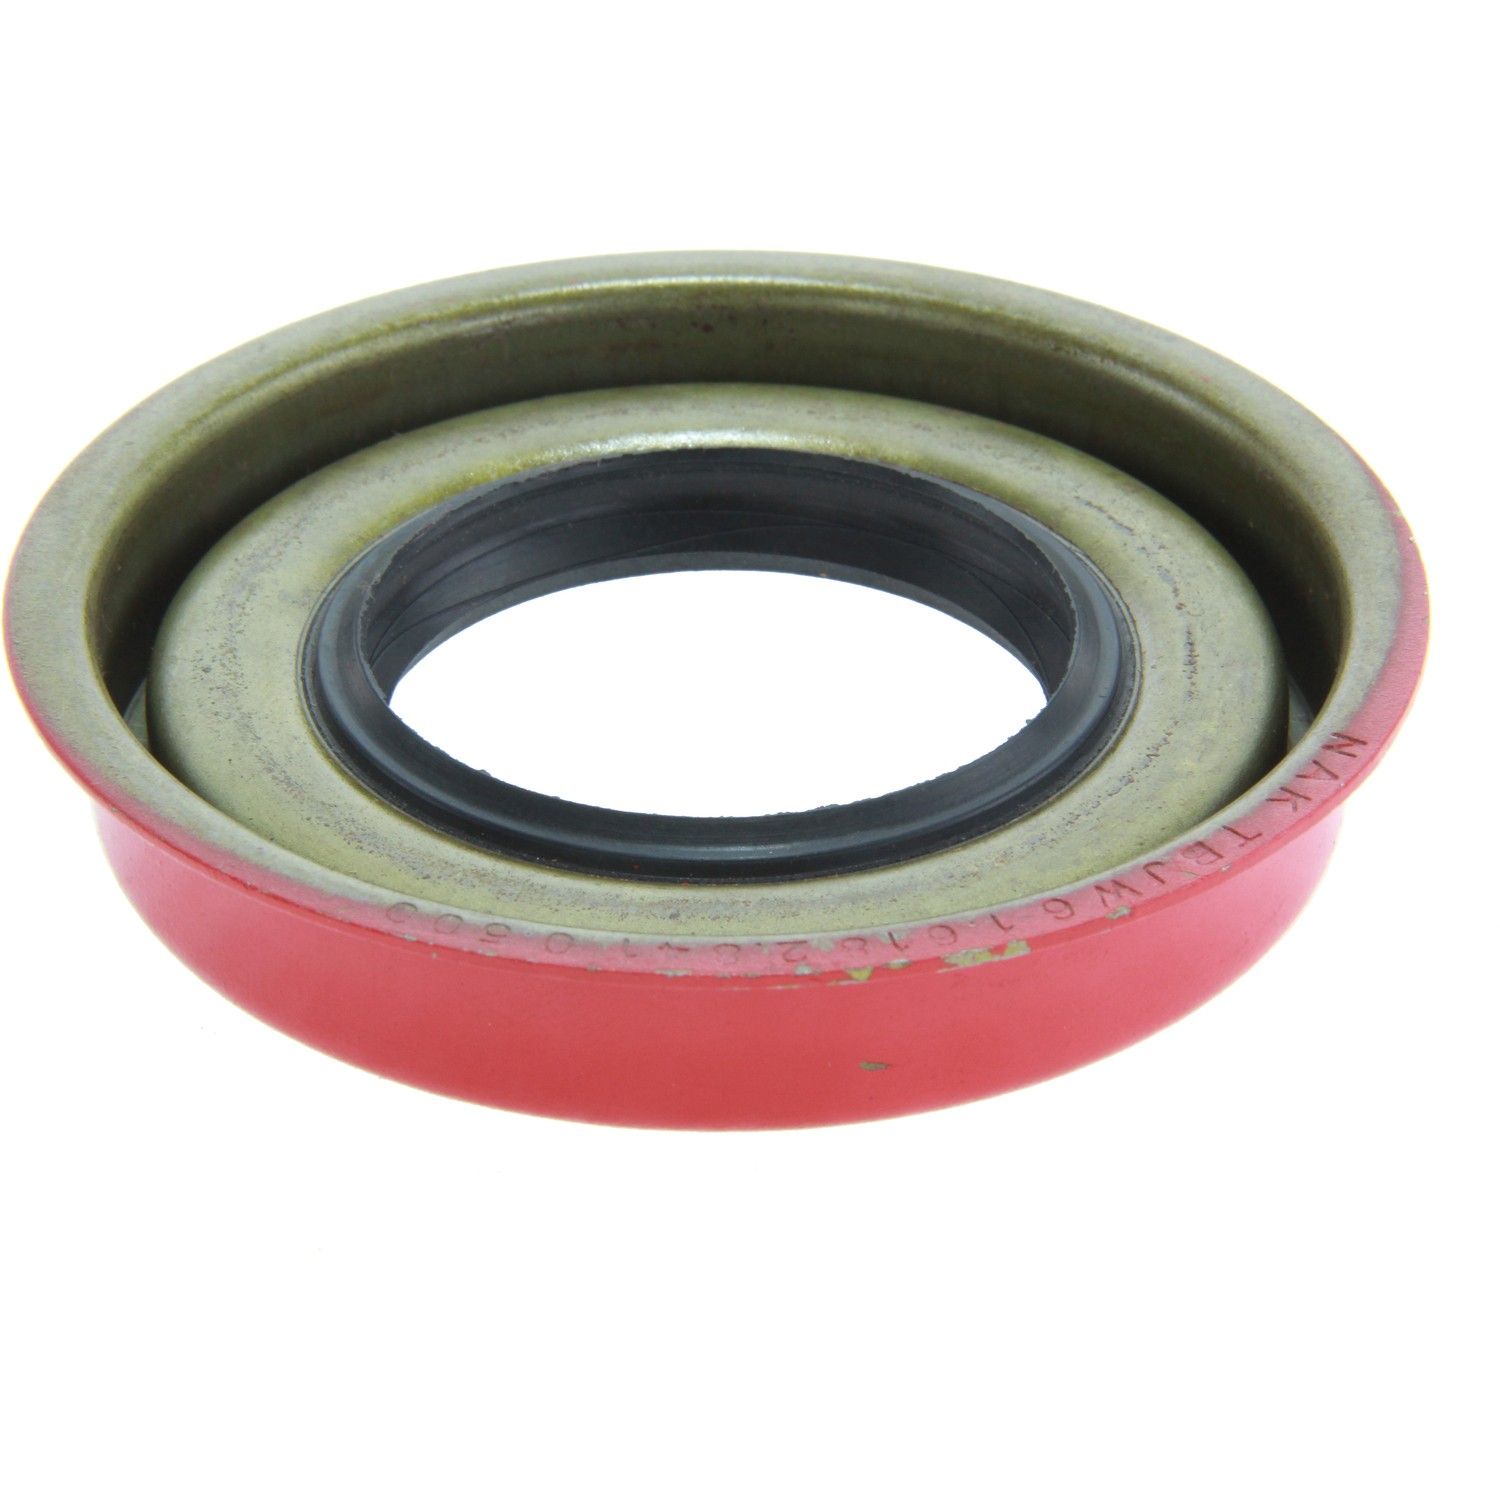 Centric Parts Axle Shaft Seal Rear 2 Of For GMC C1500 C1500 Suburban C2500